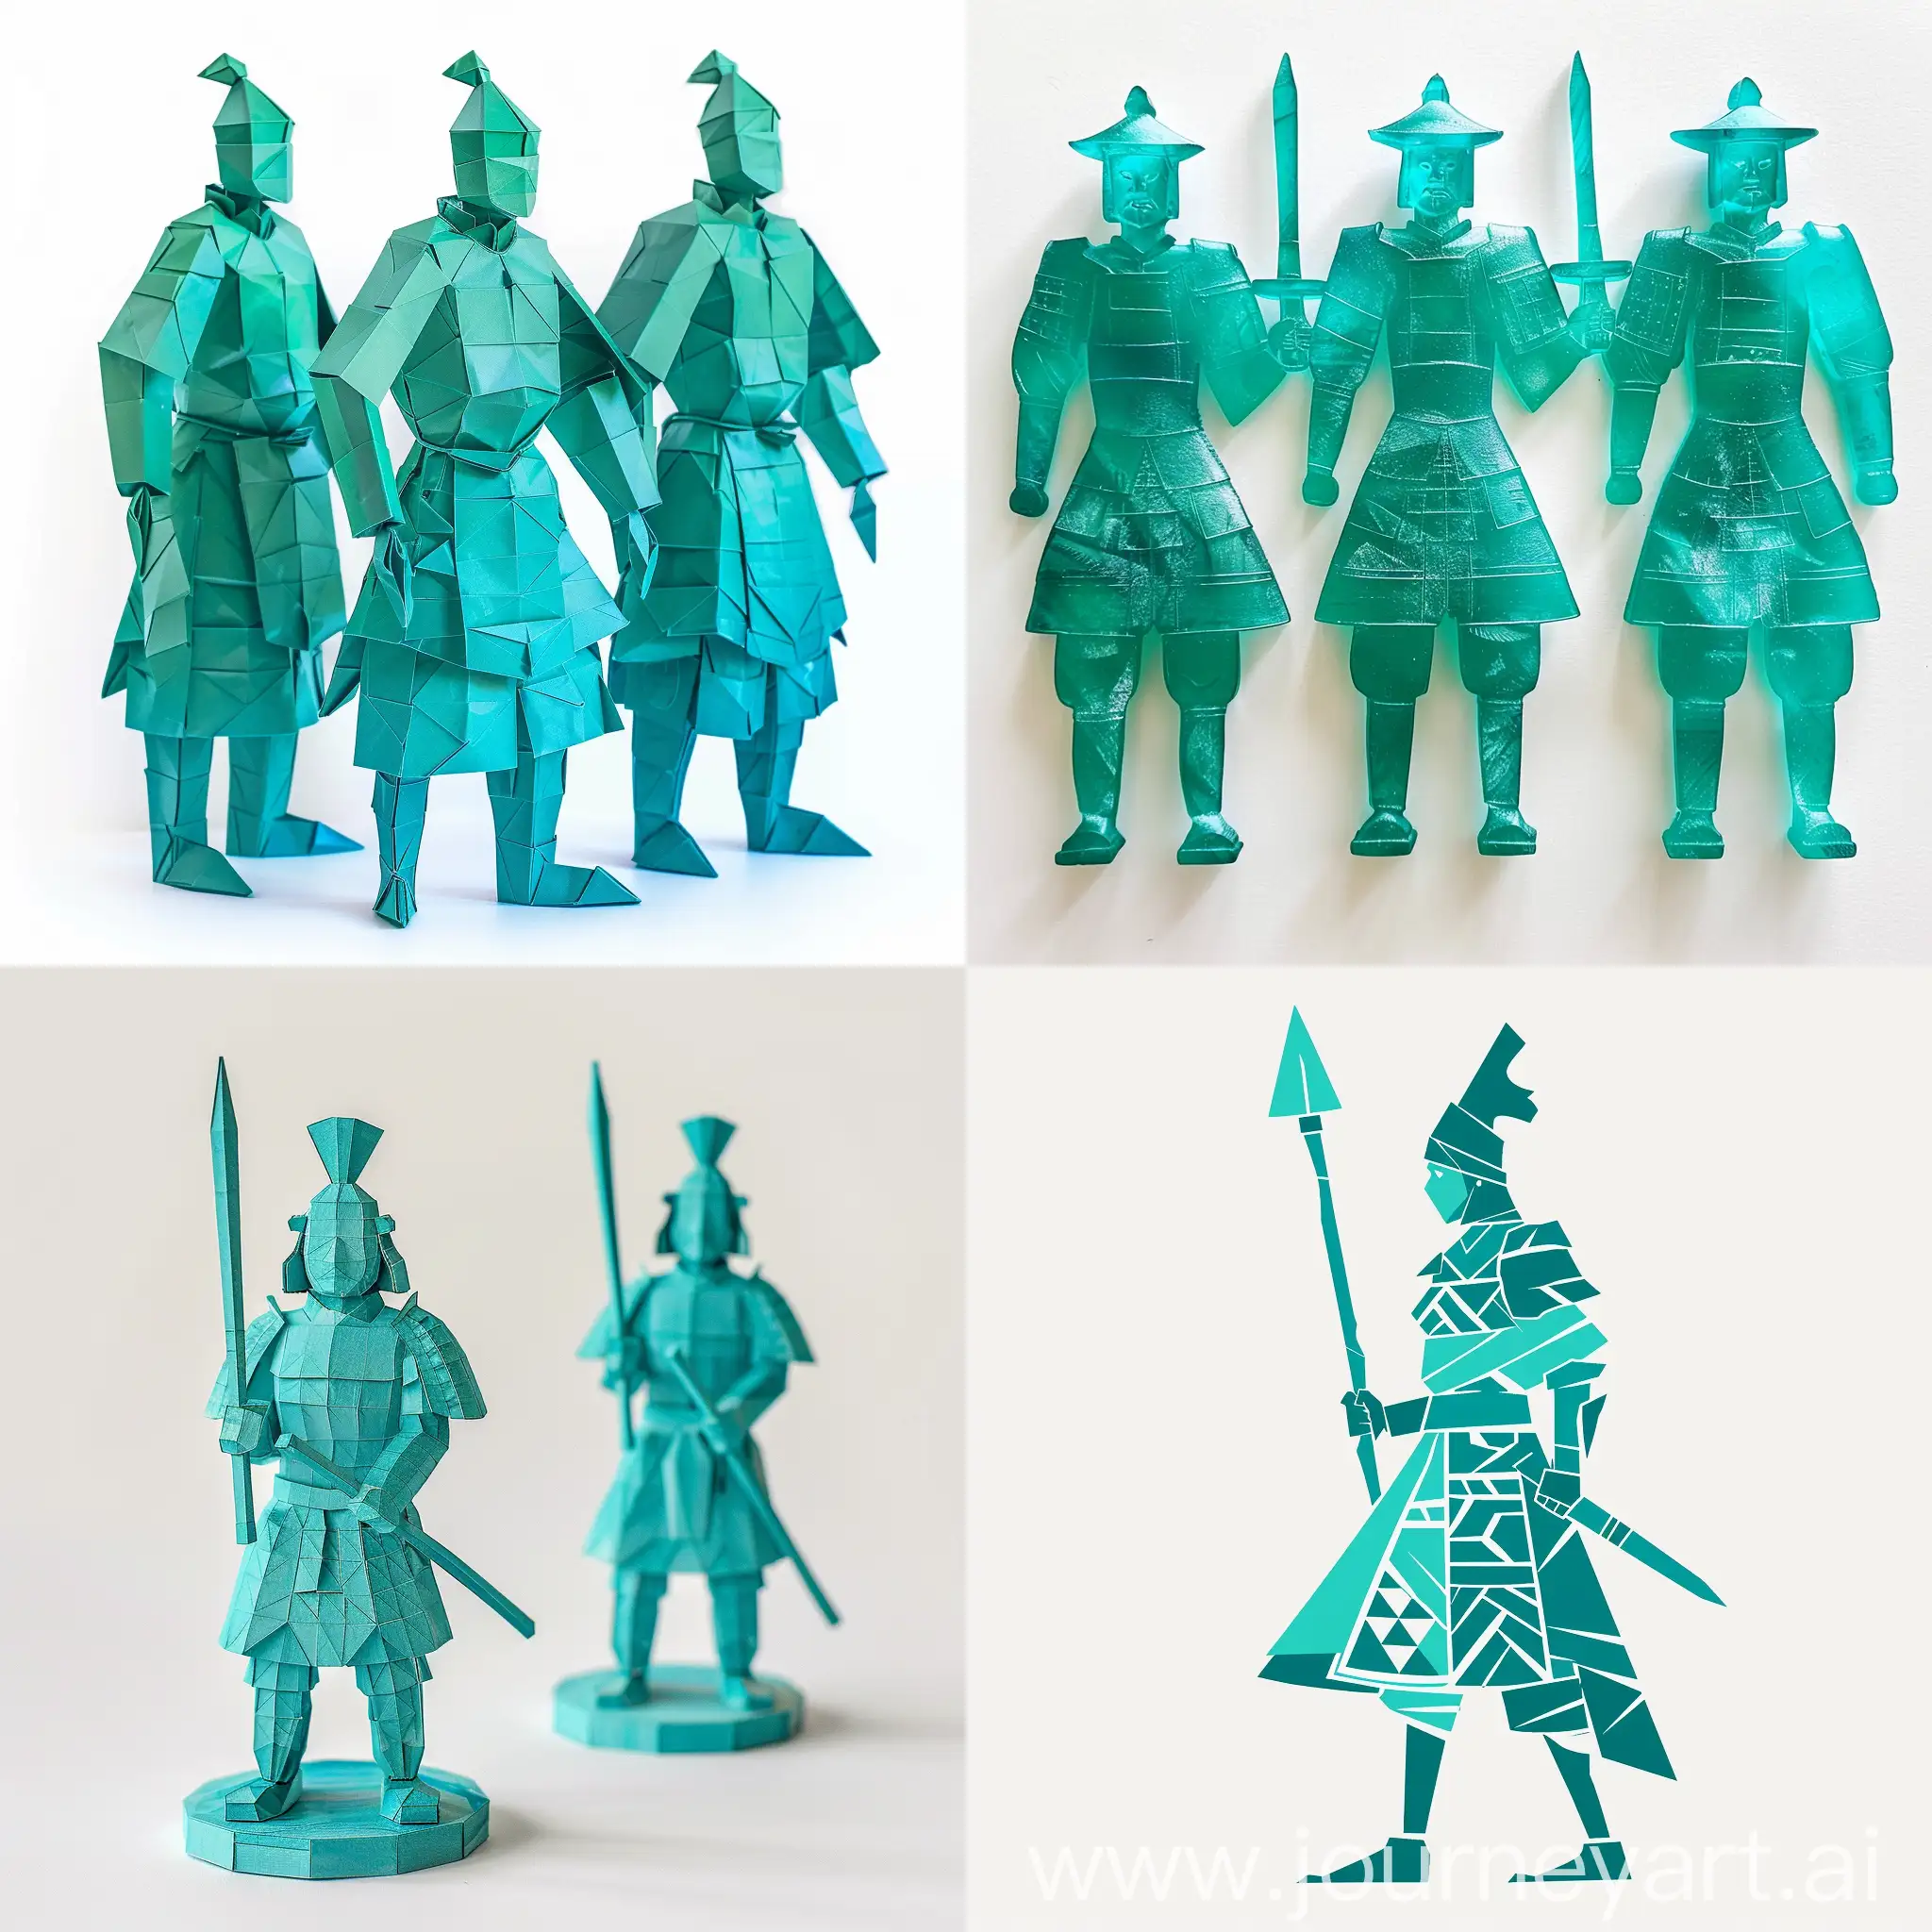 Geometric-Soldiers-of-Liava-in-Turquoise-on-White-Background